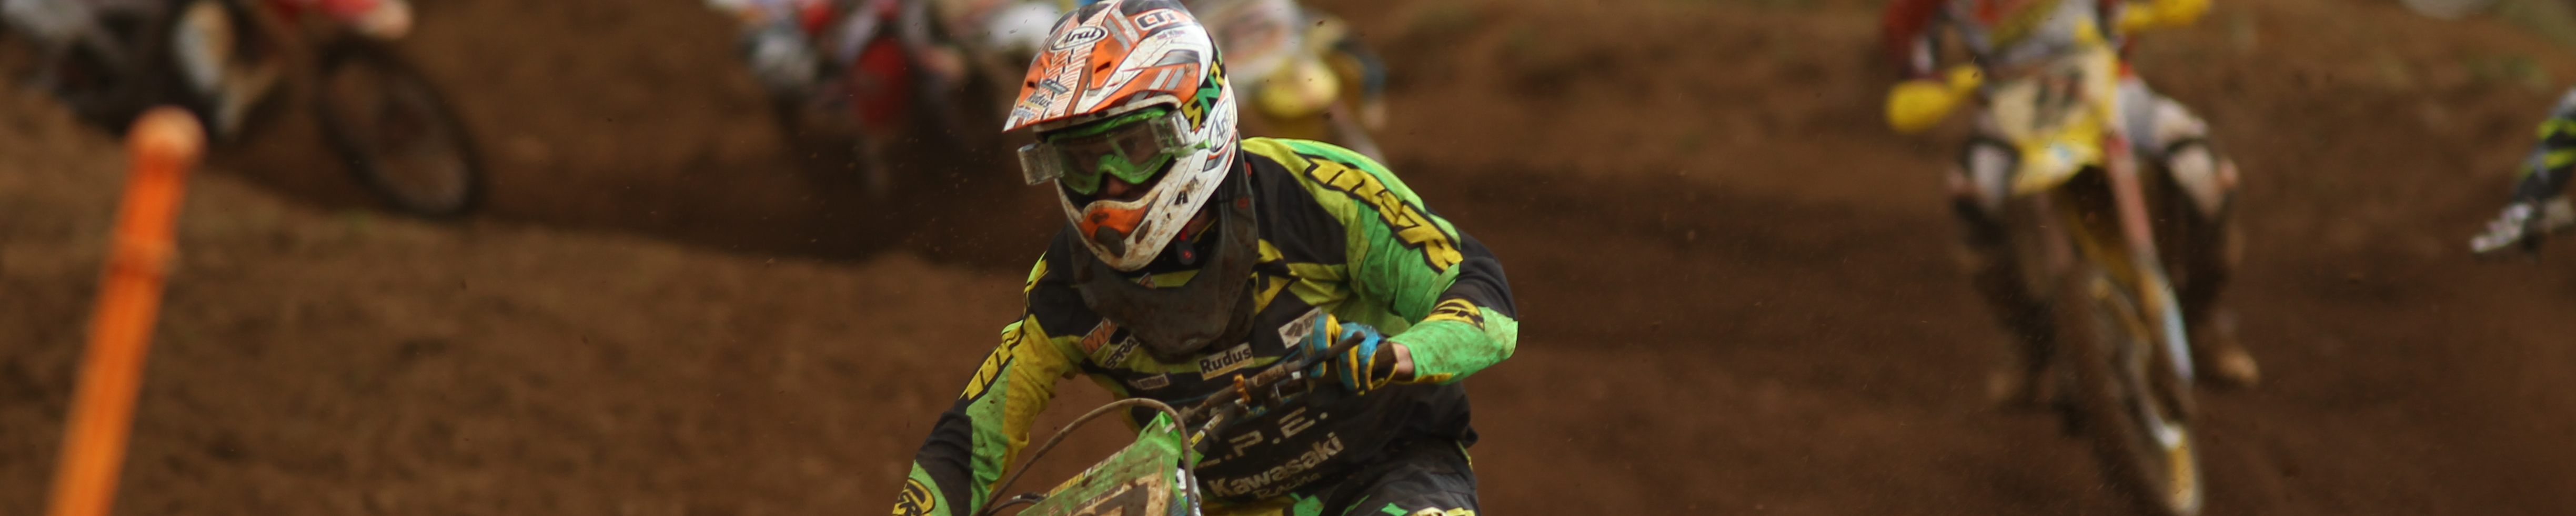 Solid day for Apico LPE Kawasaki at Cusses Gorse